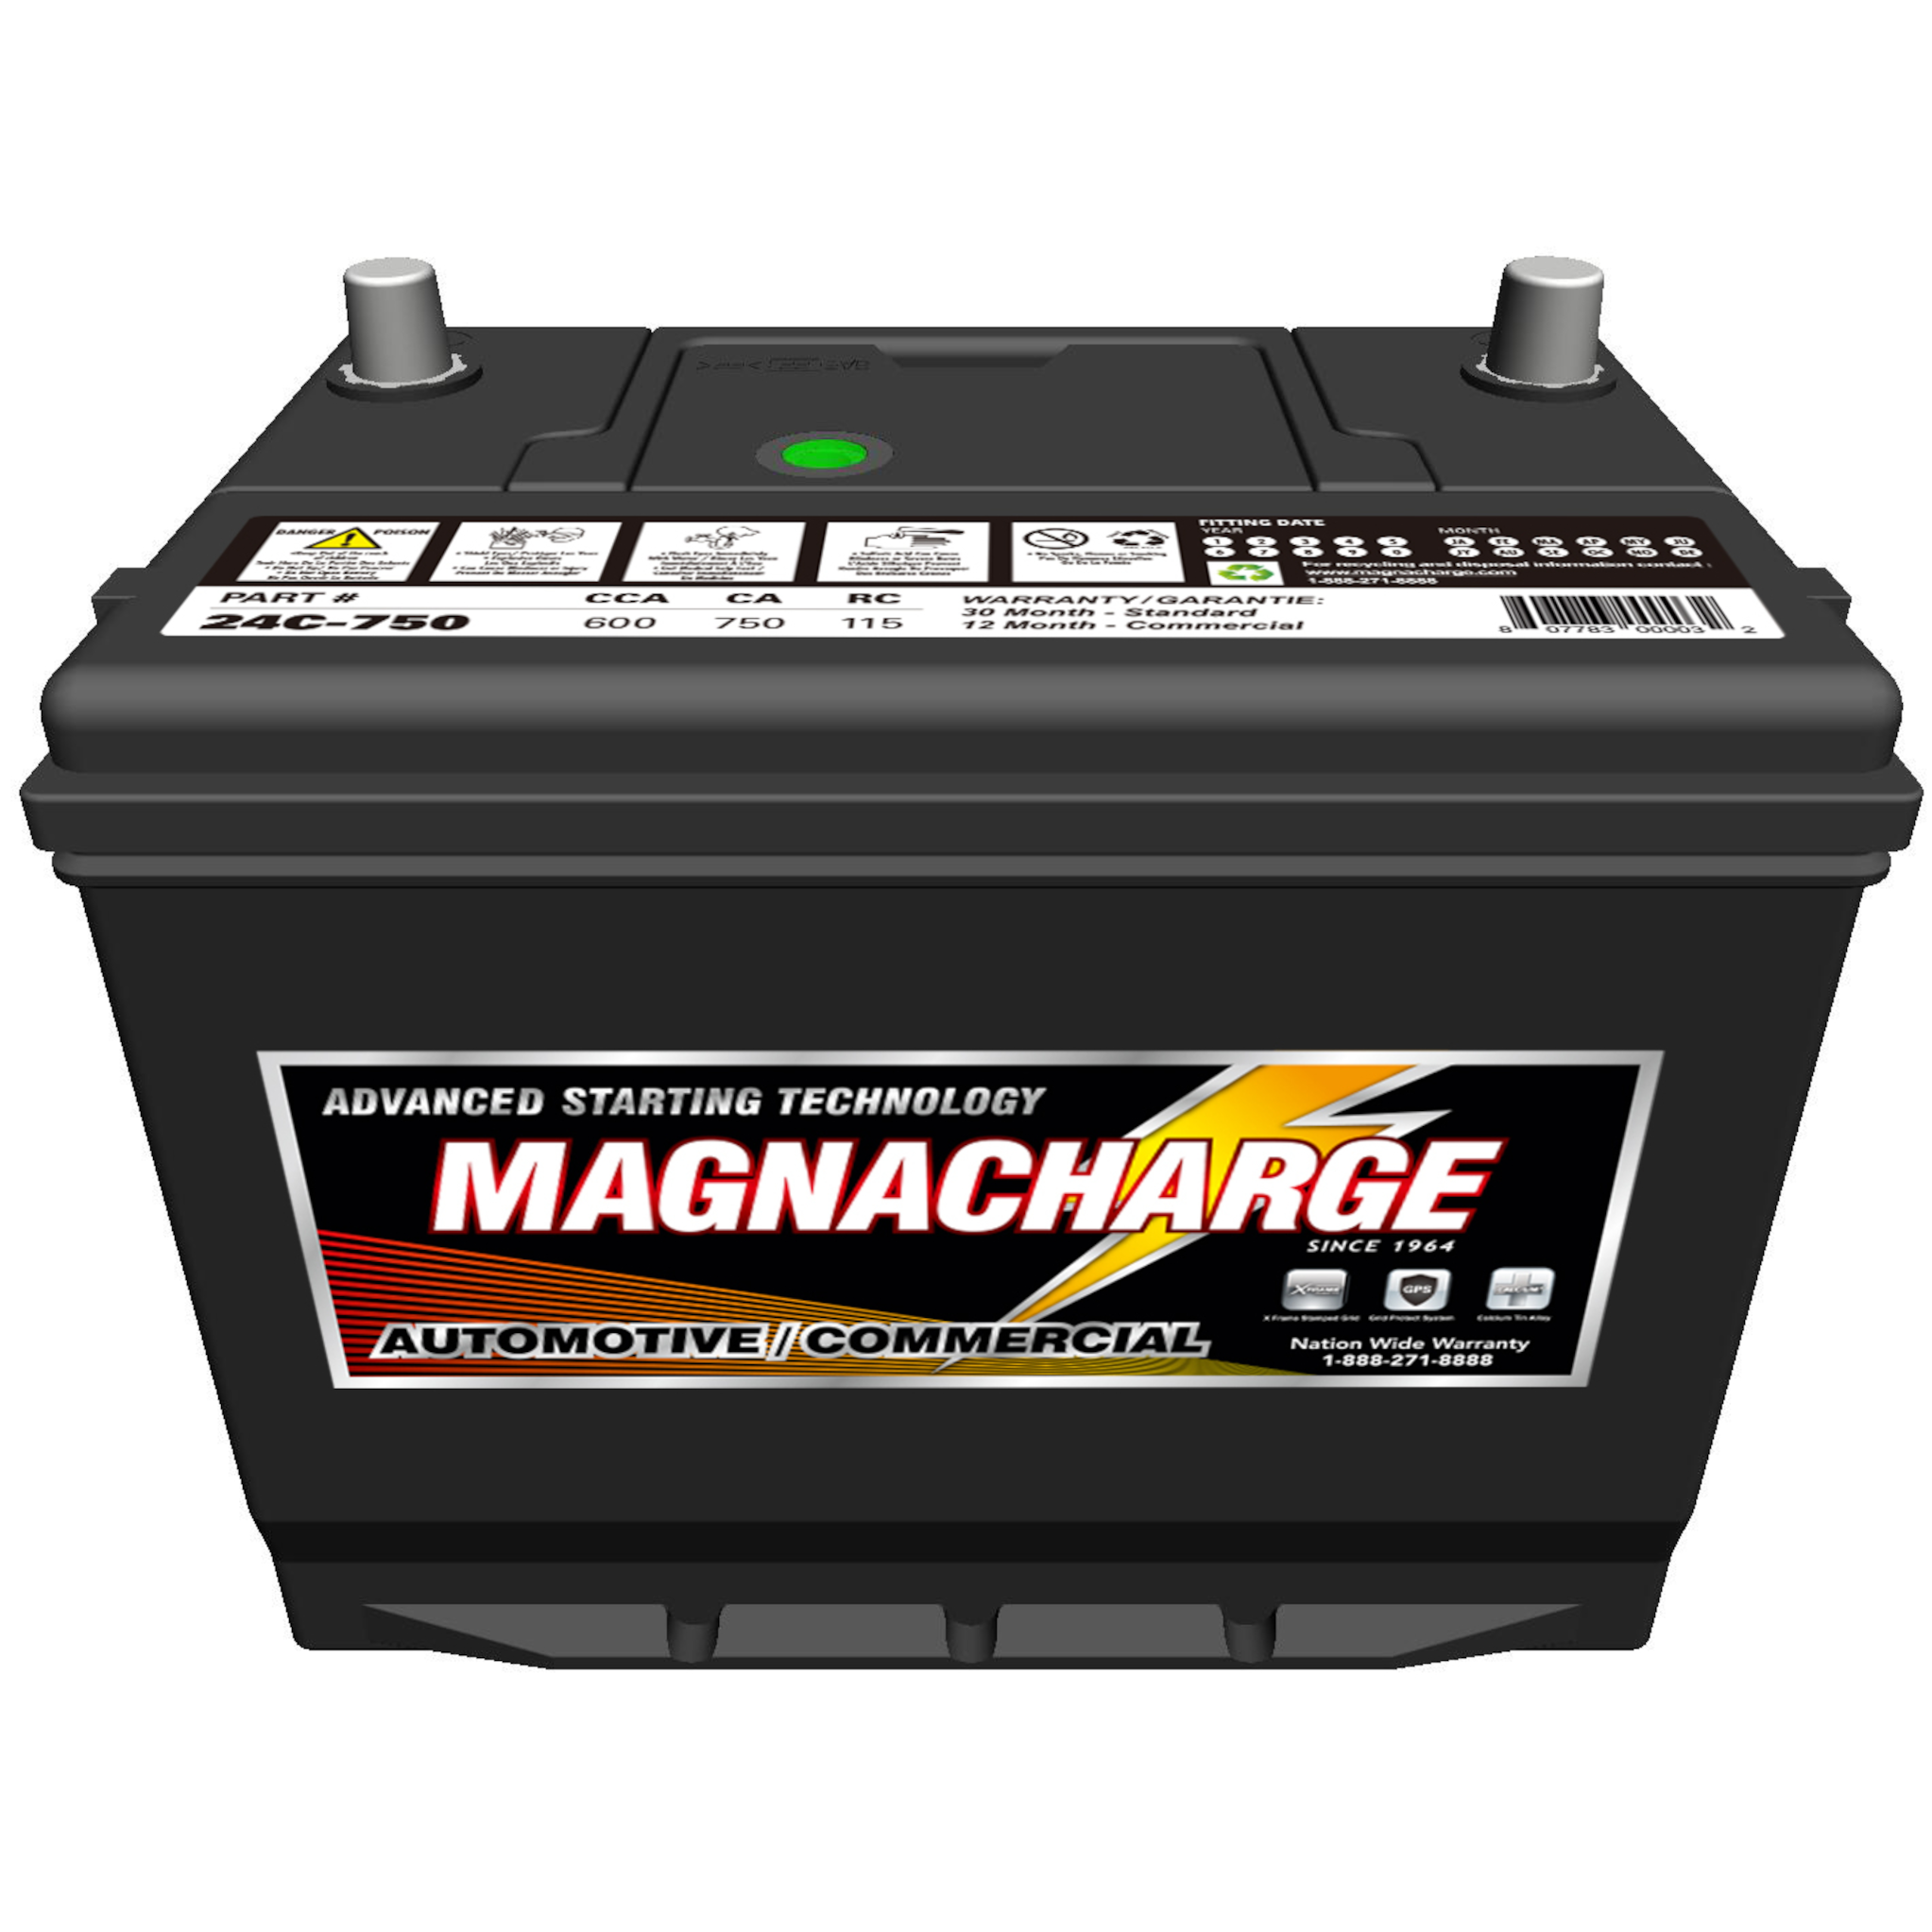 Magnacharge 24C-750 Group 24 Car Battery